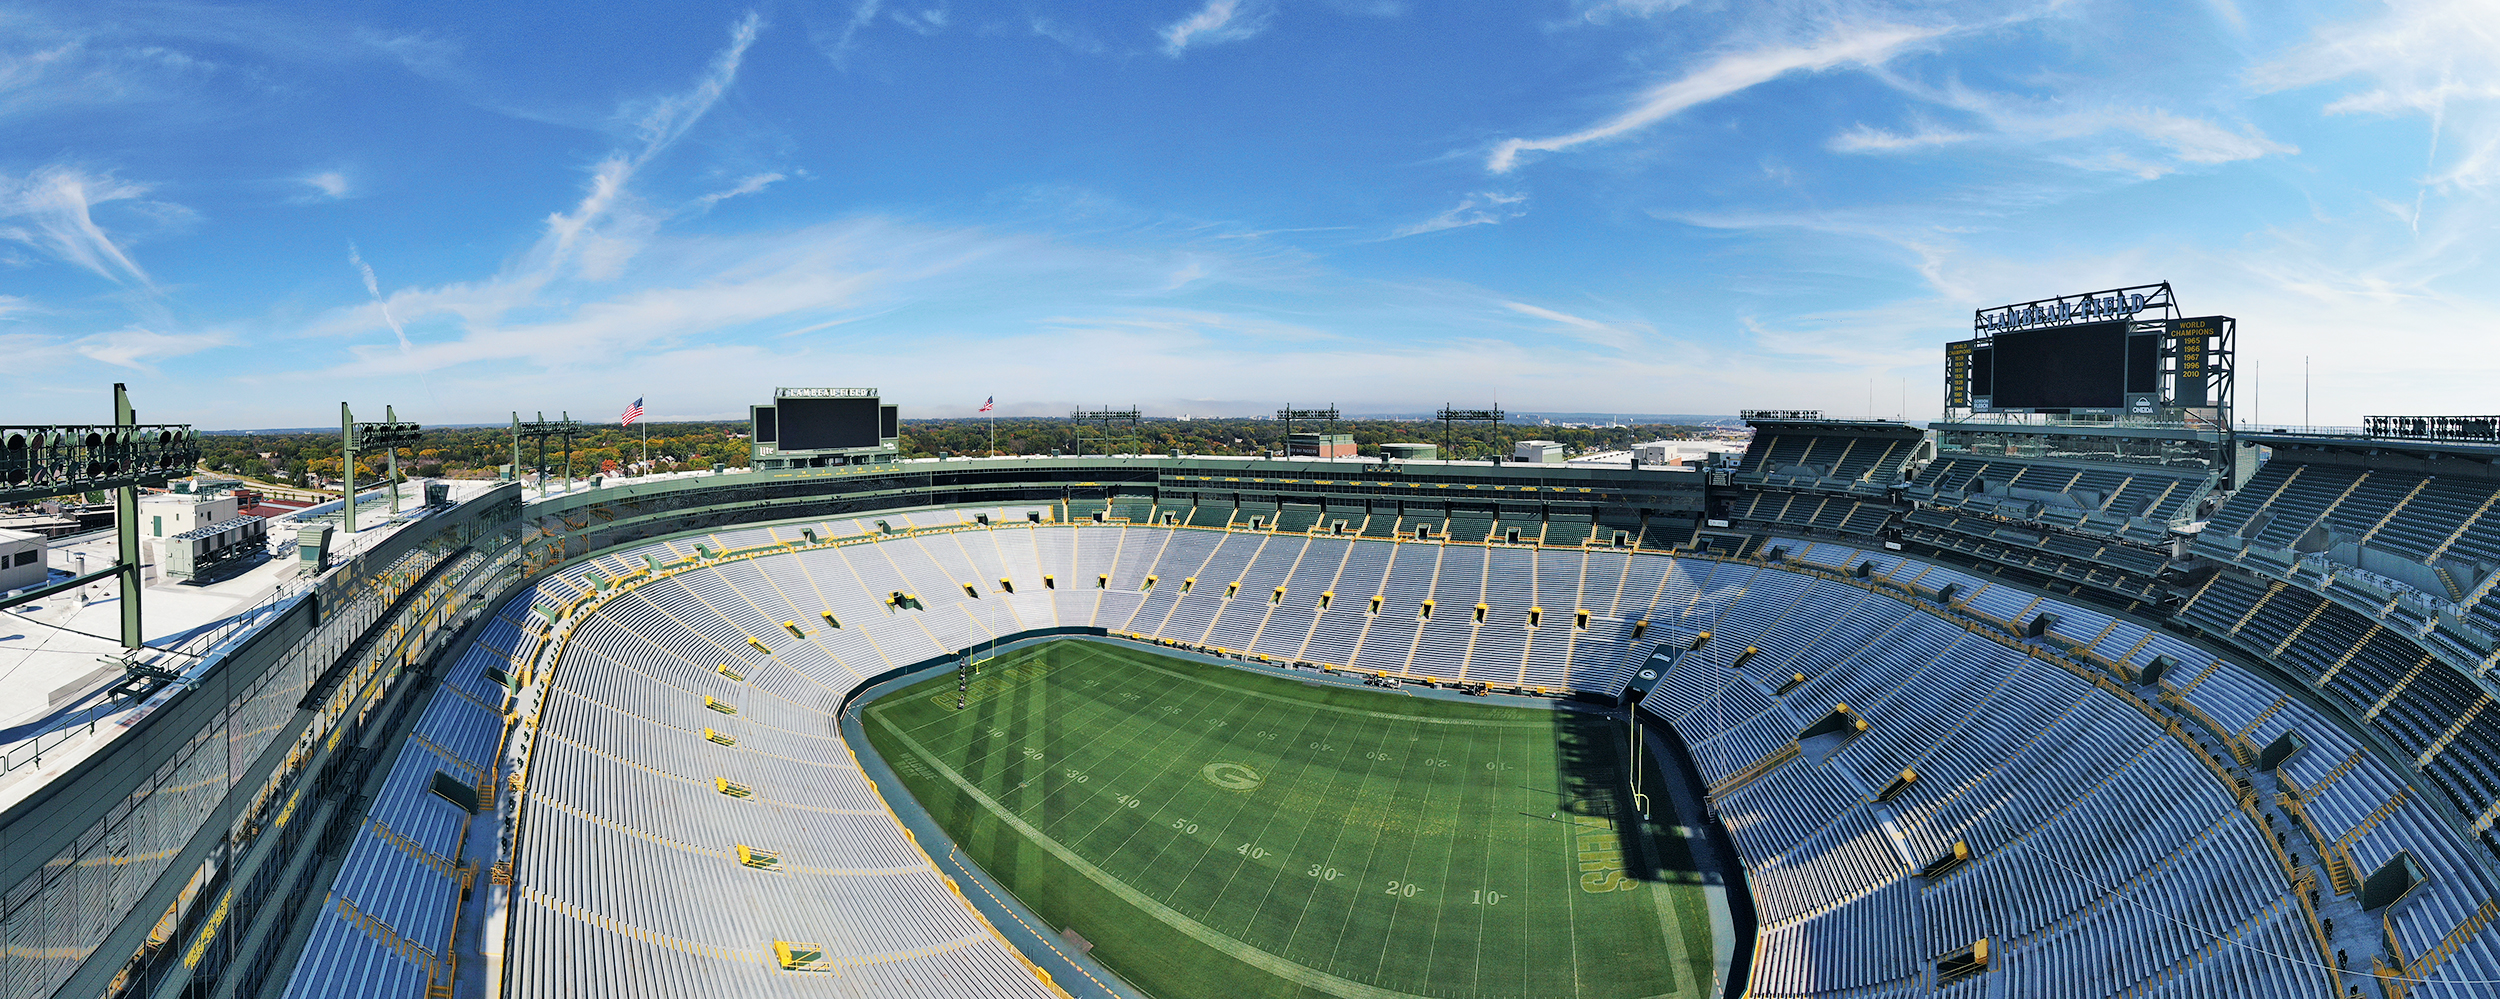 Lambeau Field bowl drone photos, drone photography cost, drone video services near me, drone services pricing, drone videography services, uav drone pilot, real estate aerial photography, drone video services, drone construction surveying, aerial drone services, commercial drone pilot, real estate drone photography pricing,